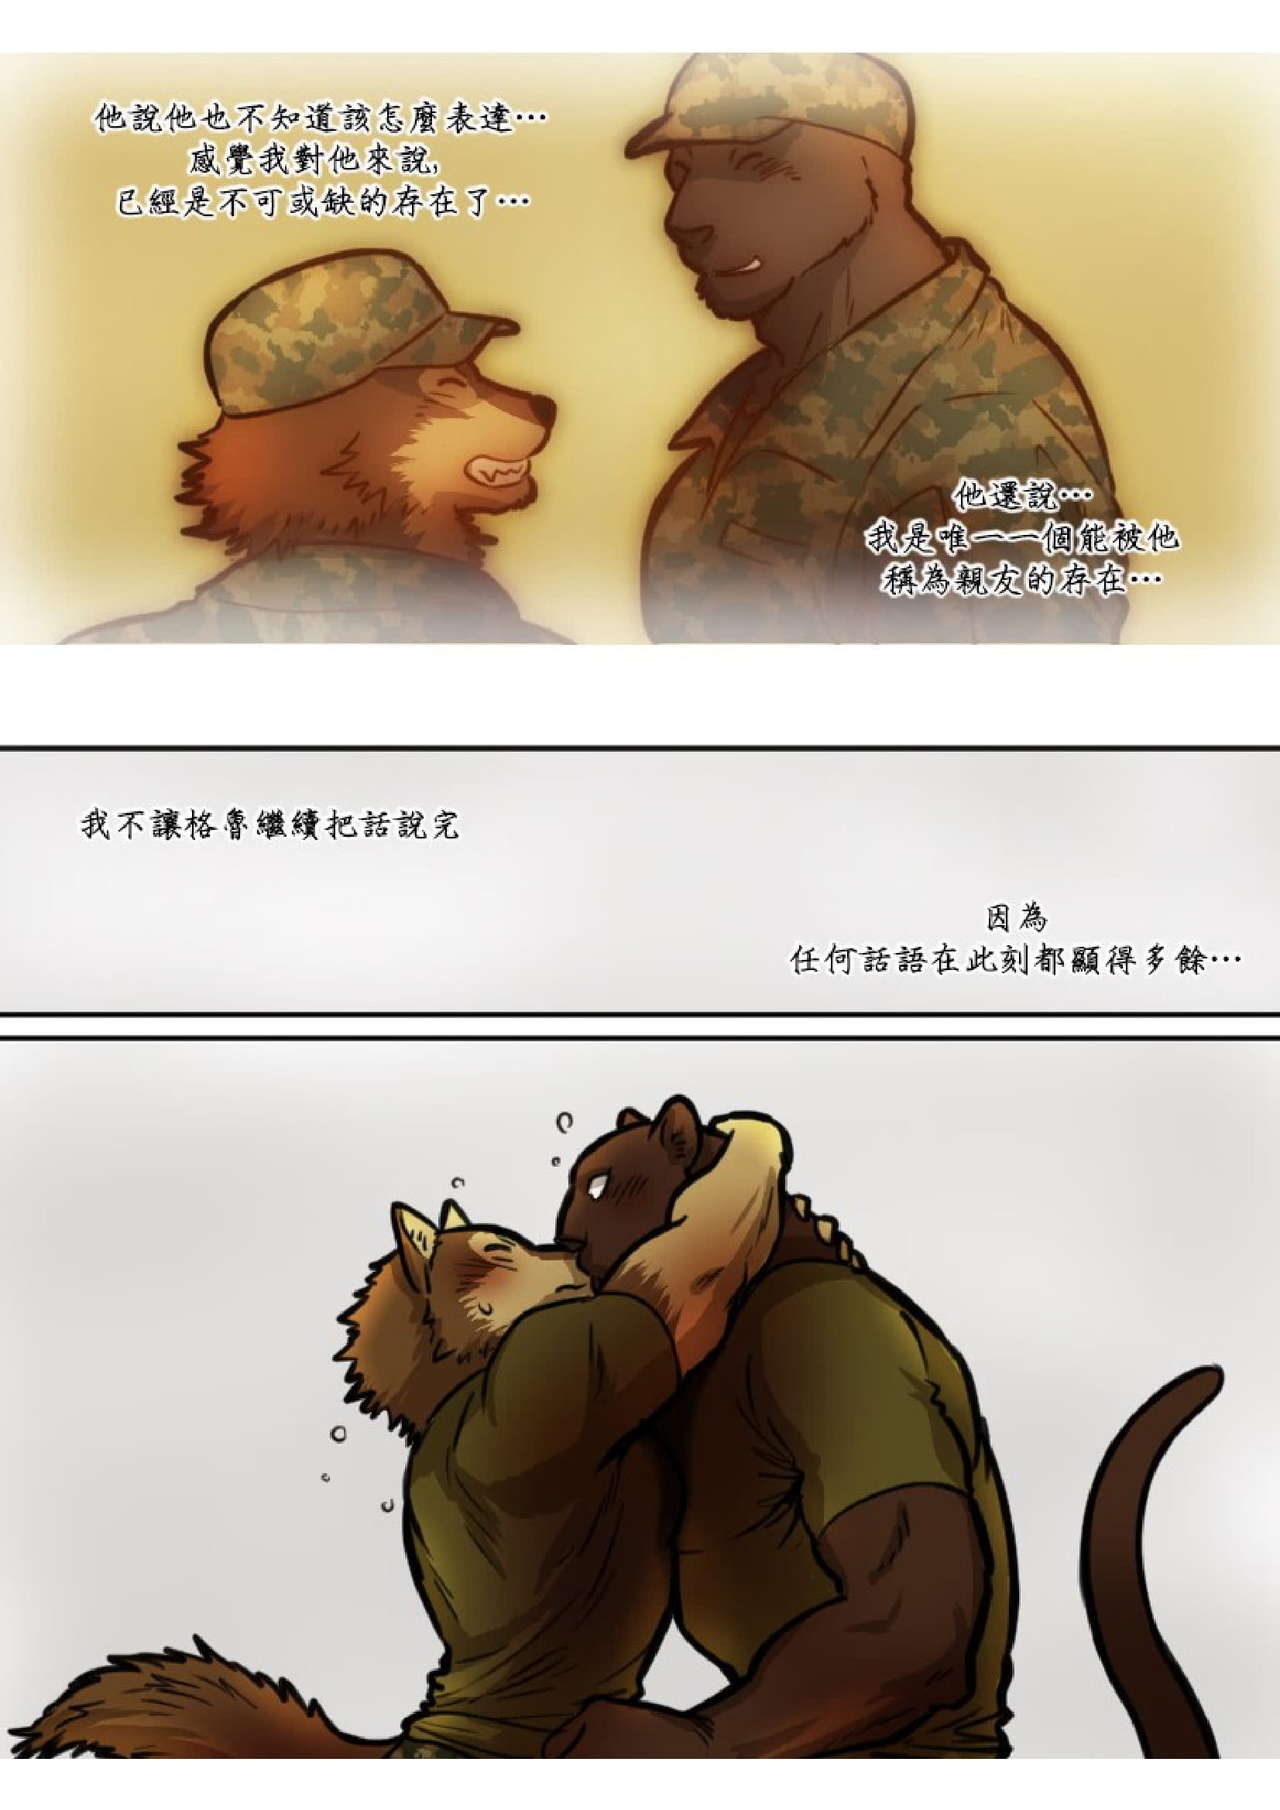 [Maririn] Brothers In Arms [Chinese] 49